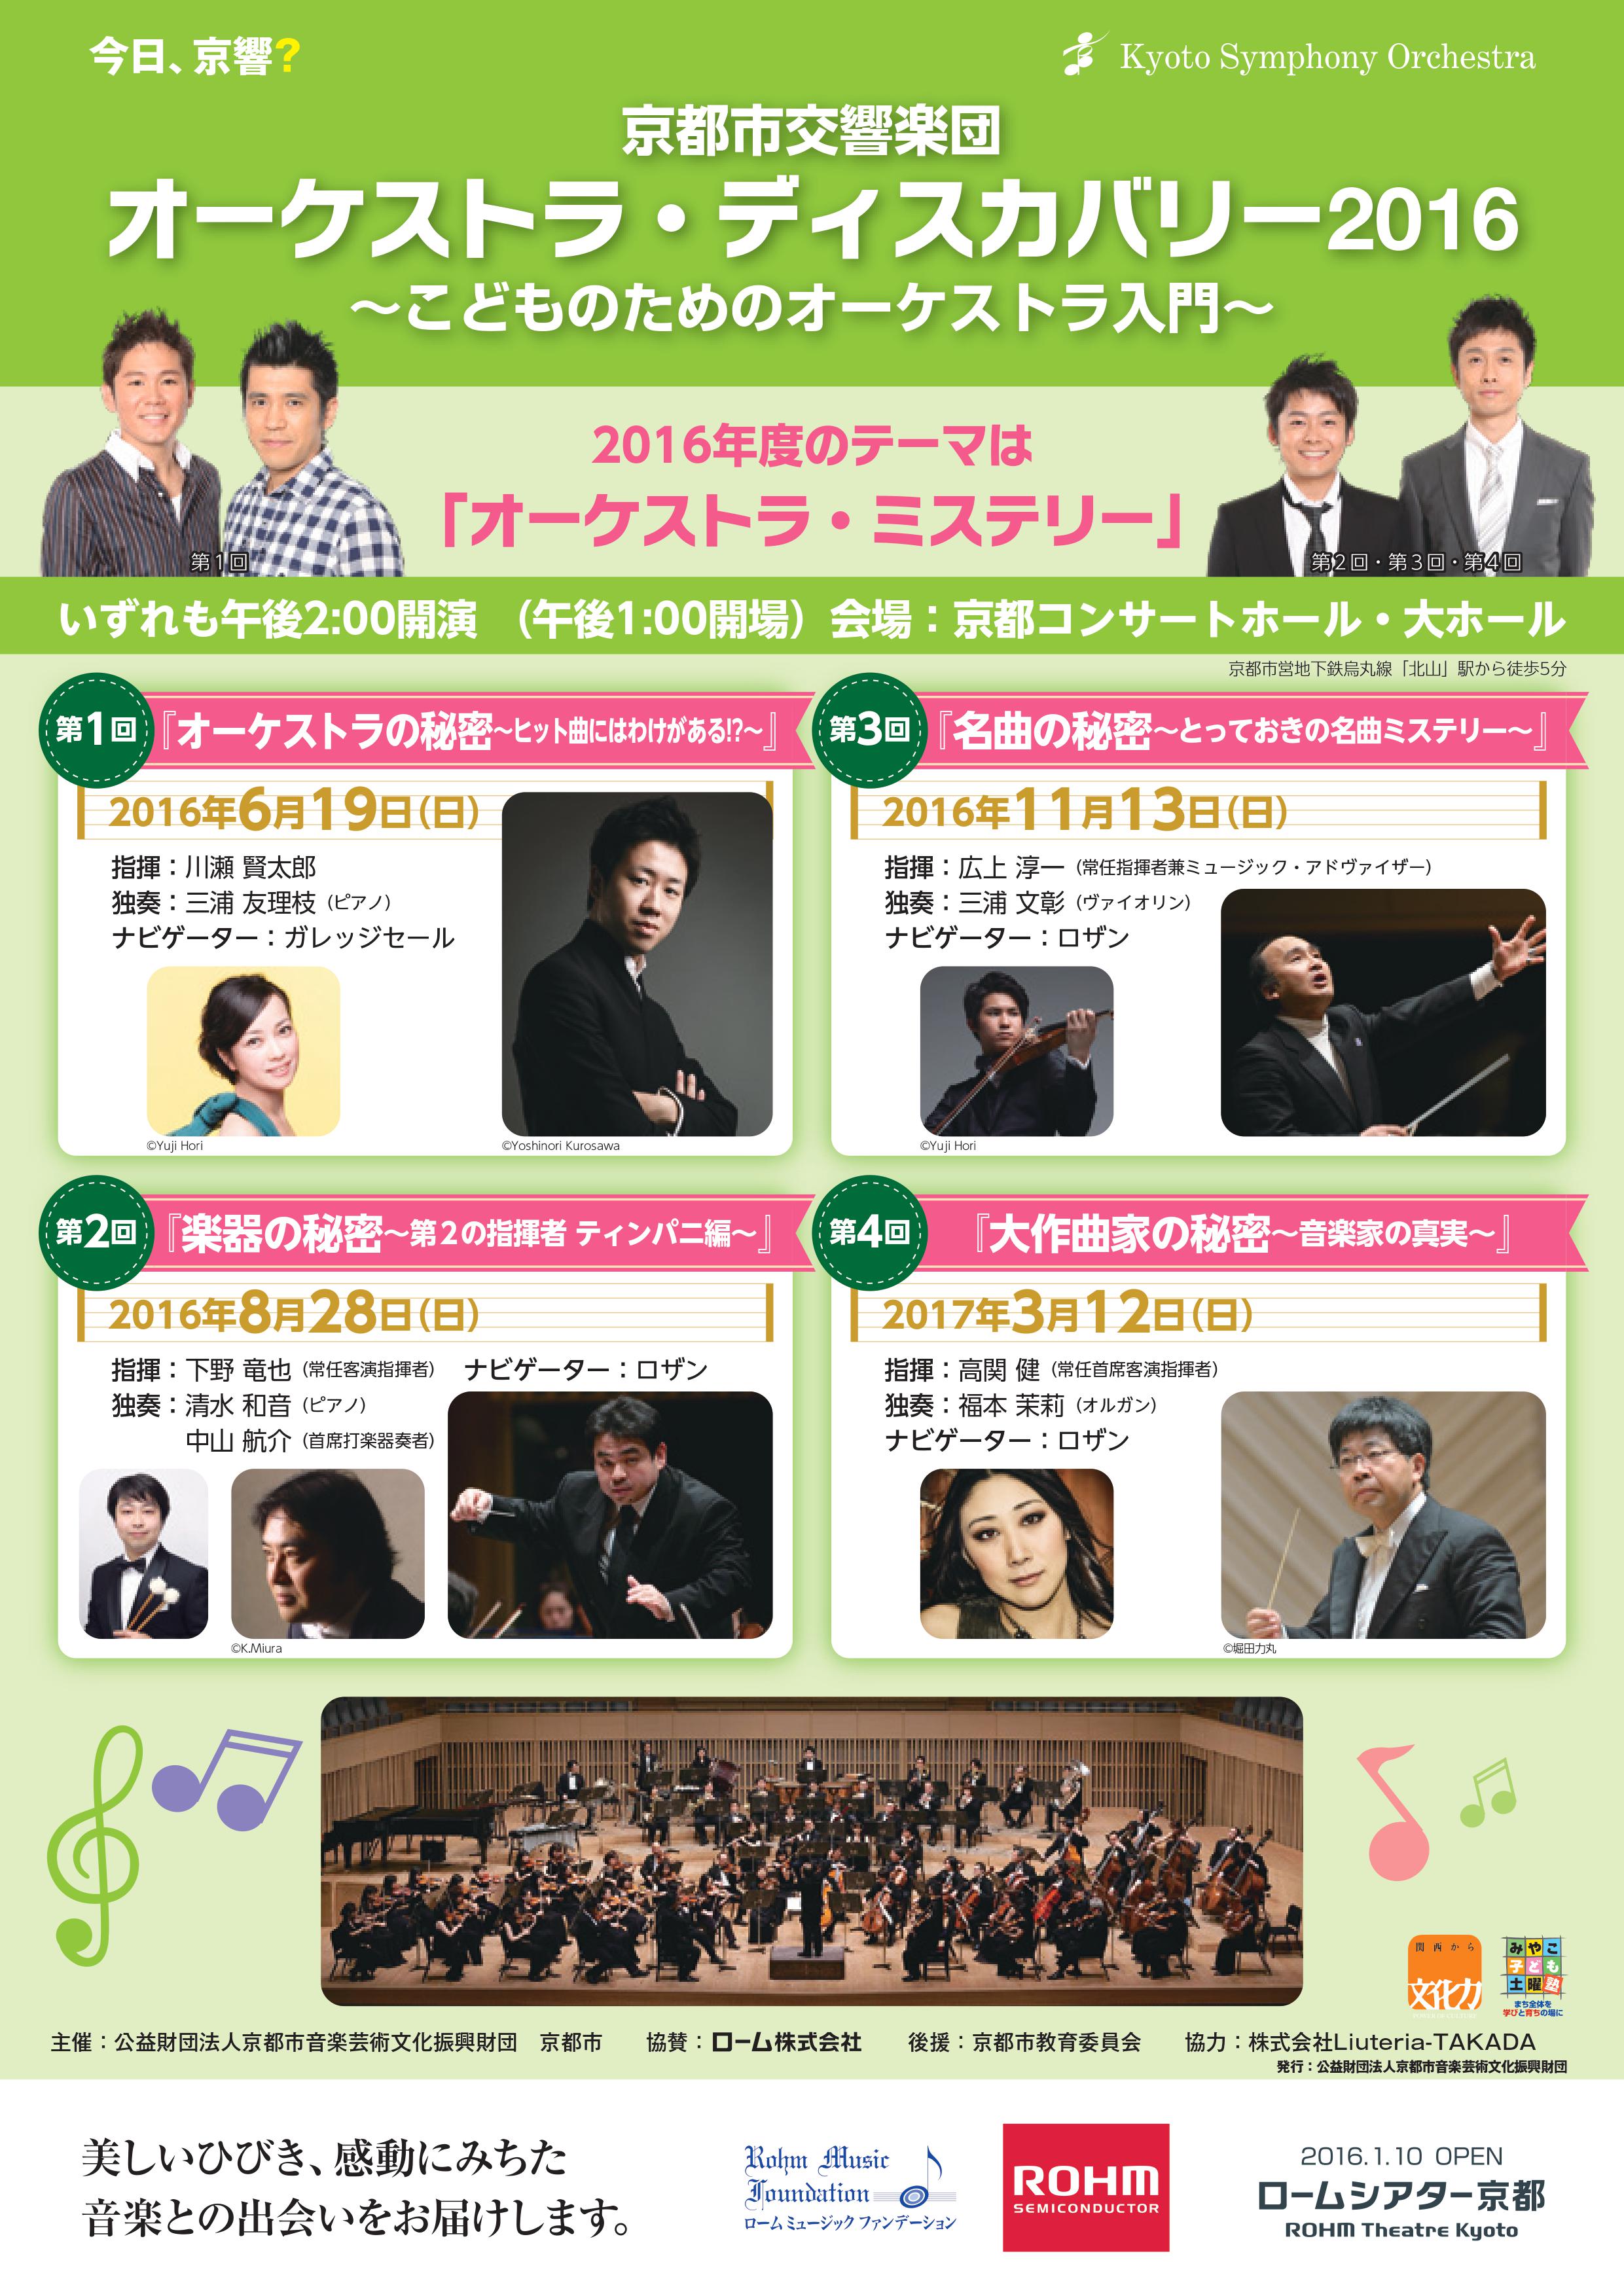 This week’s concert (22 August – 28 August, 2016)